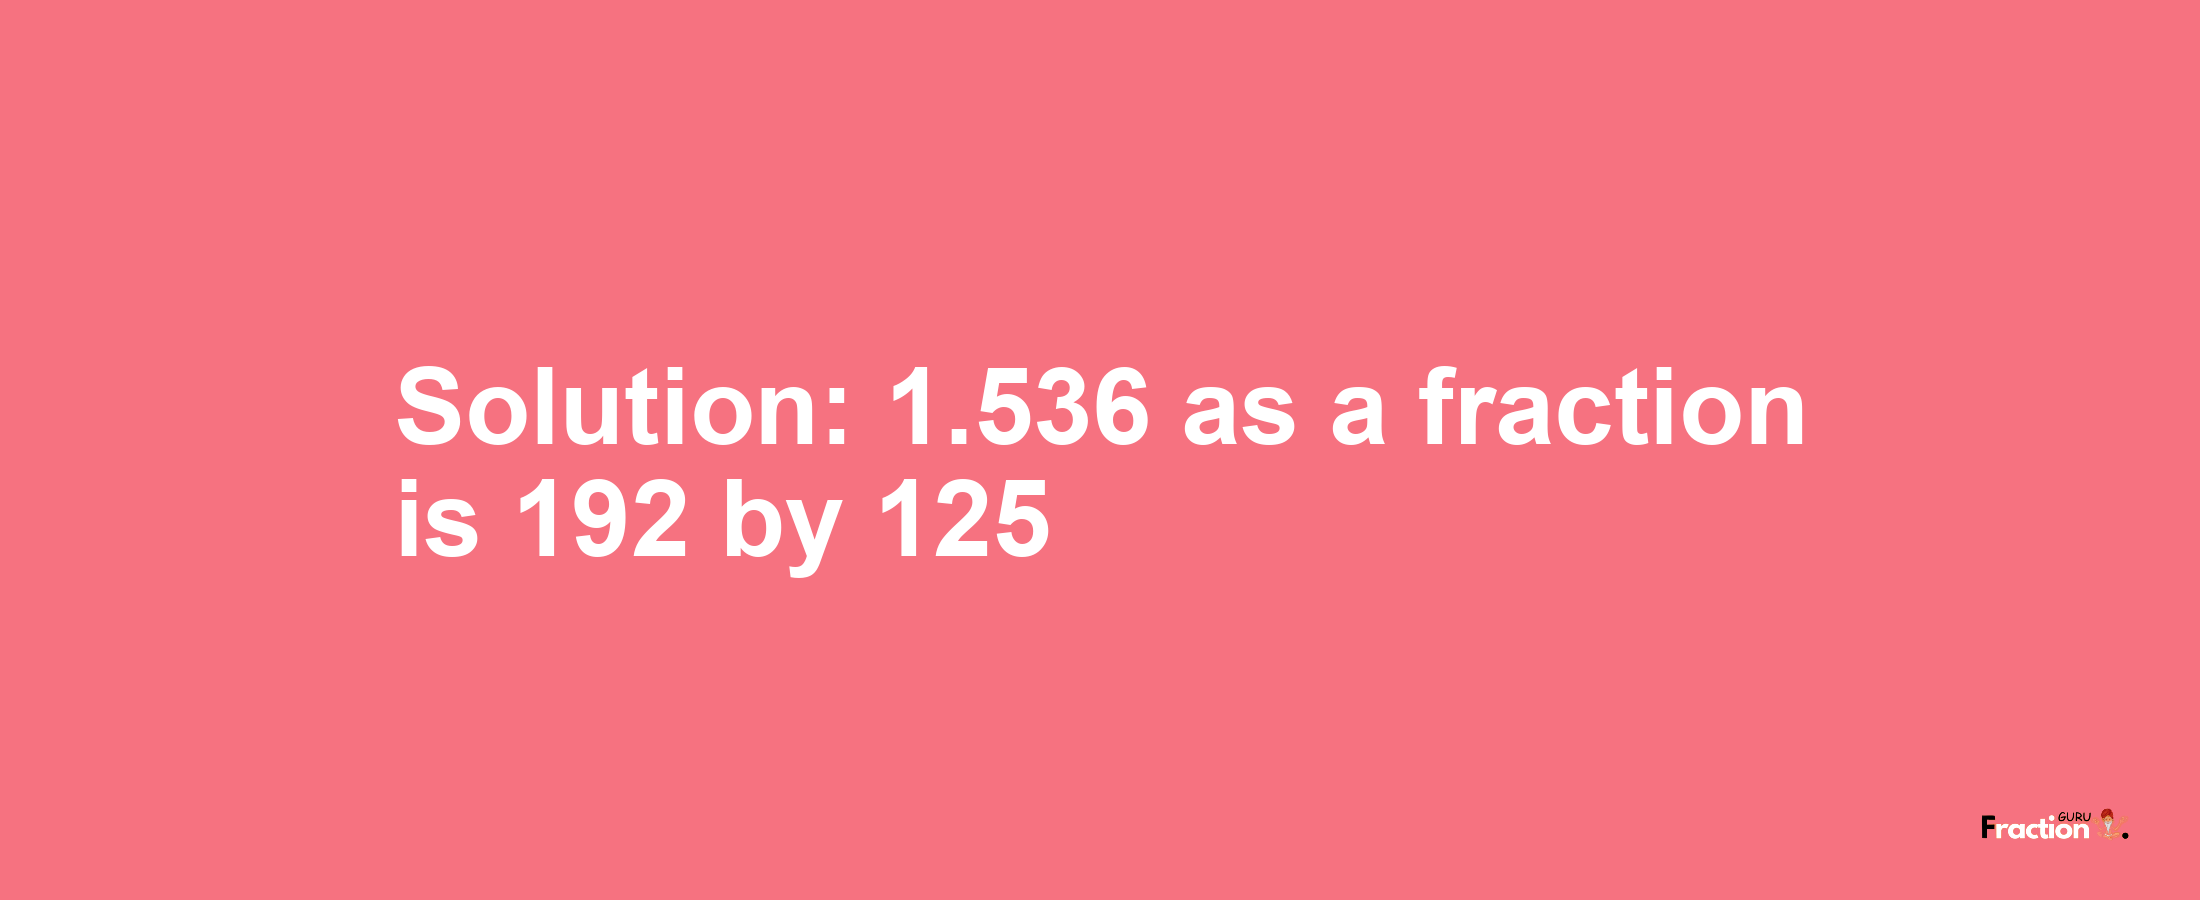 Solution:1.536 as a fraction is 192/125